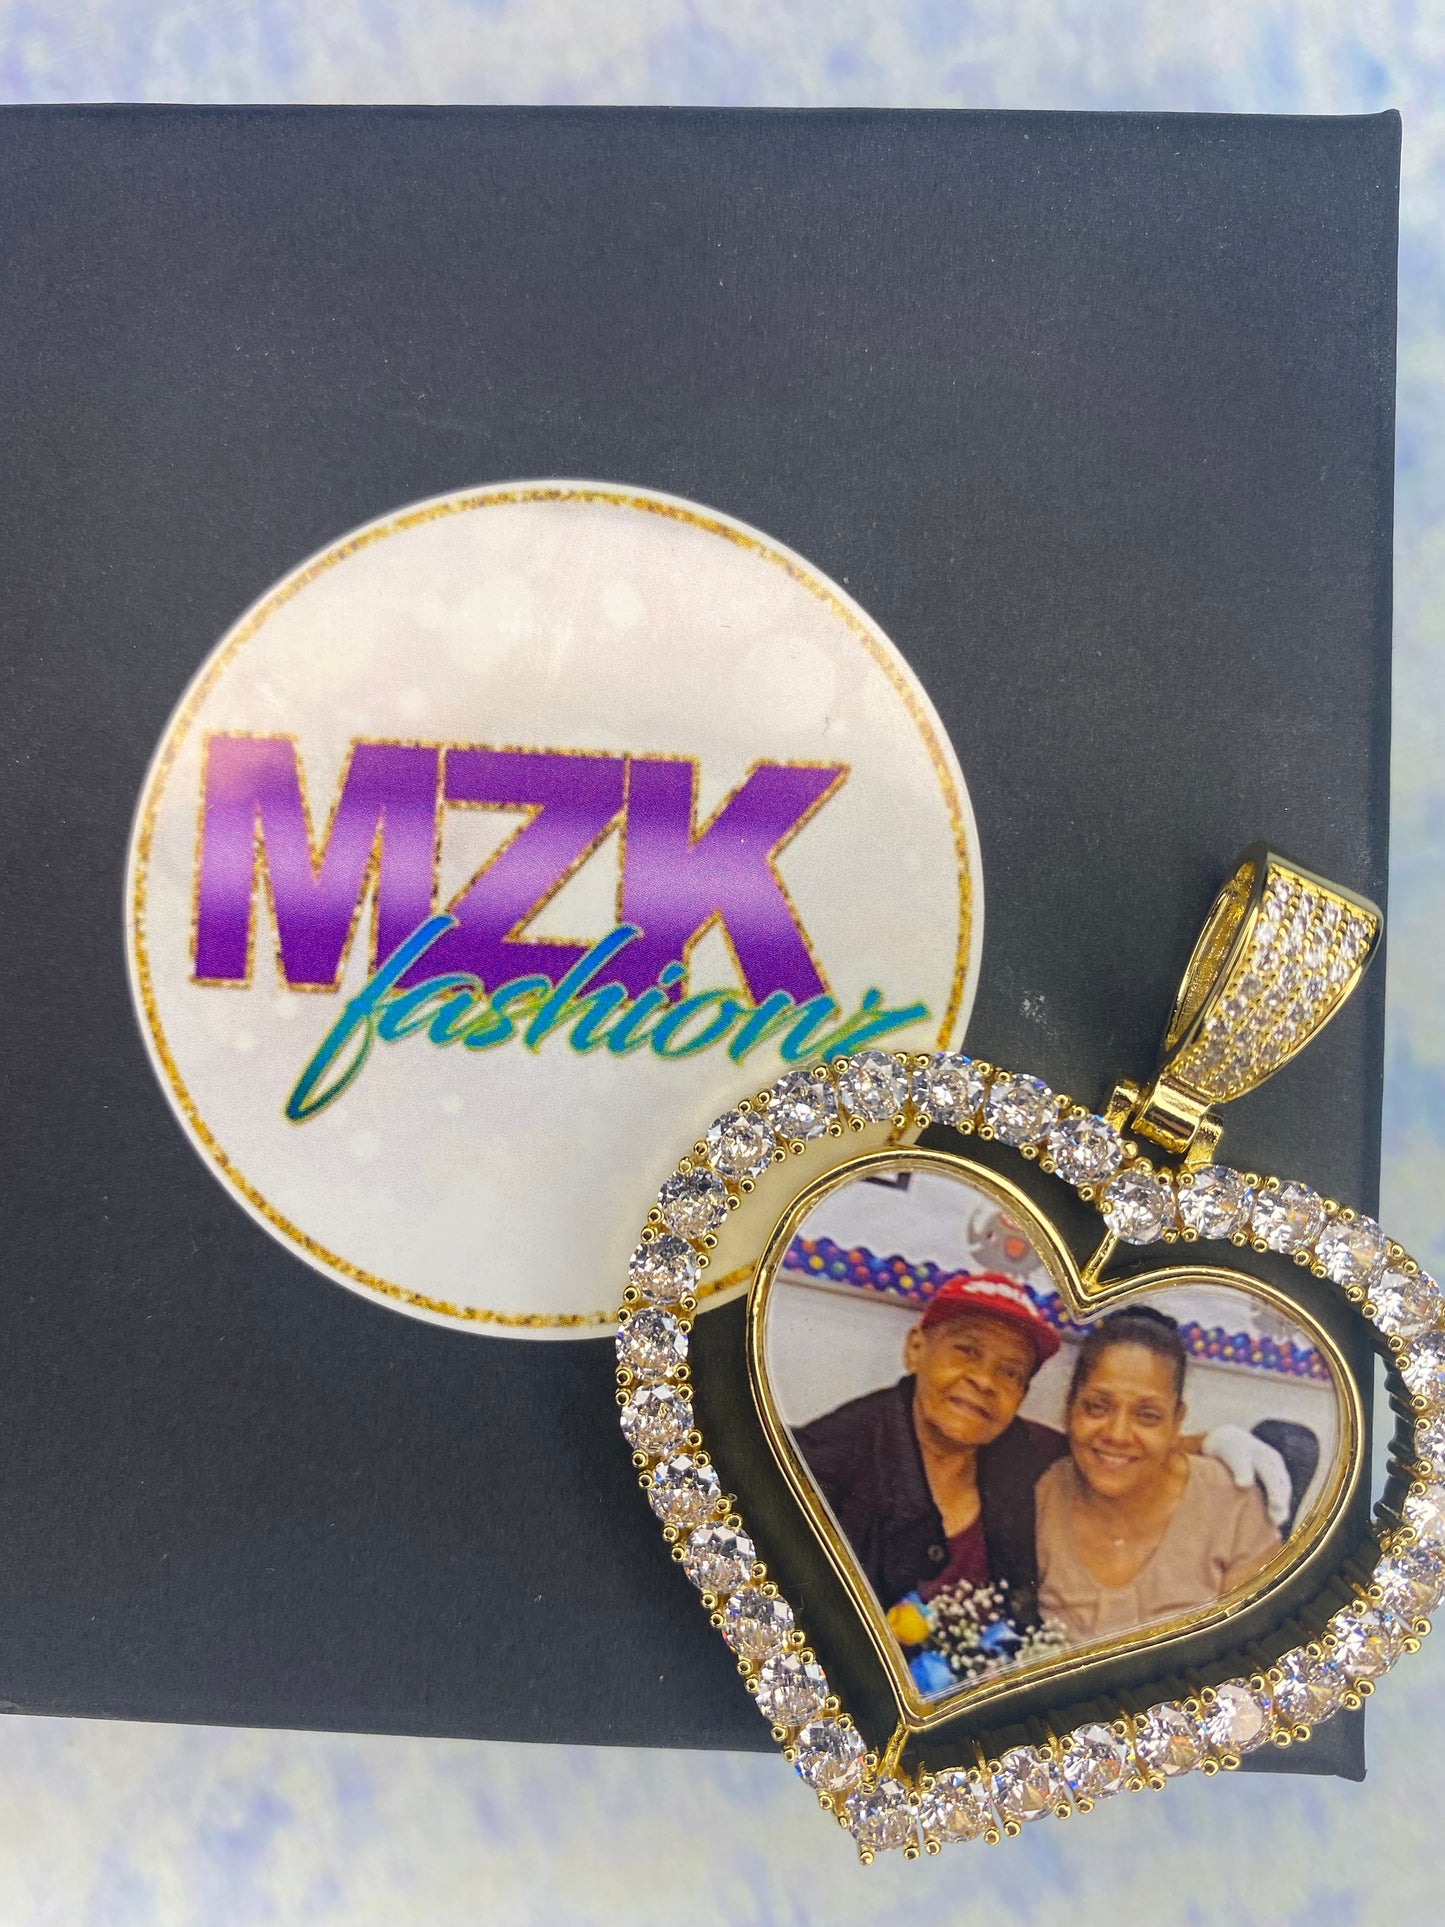 Make Your Memories Last Forever with a Personalized Heart-Shaped Photo Pendant - Rotating, Double-Sided Design | Order Now for a Meaningful Gift